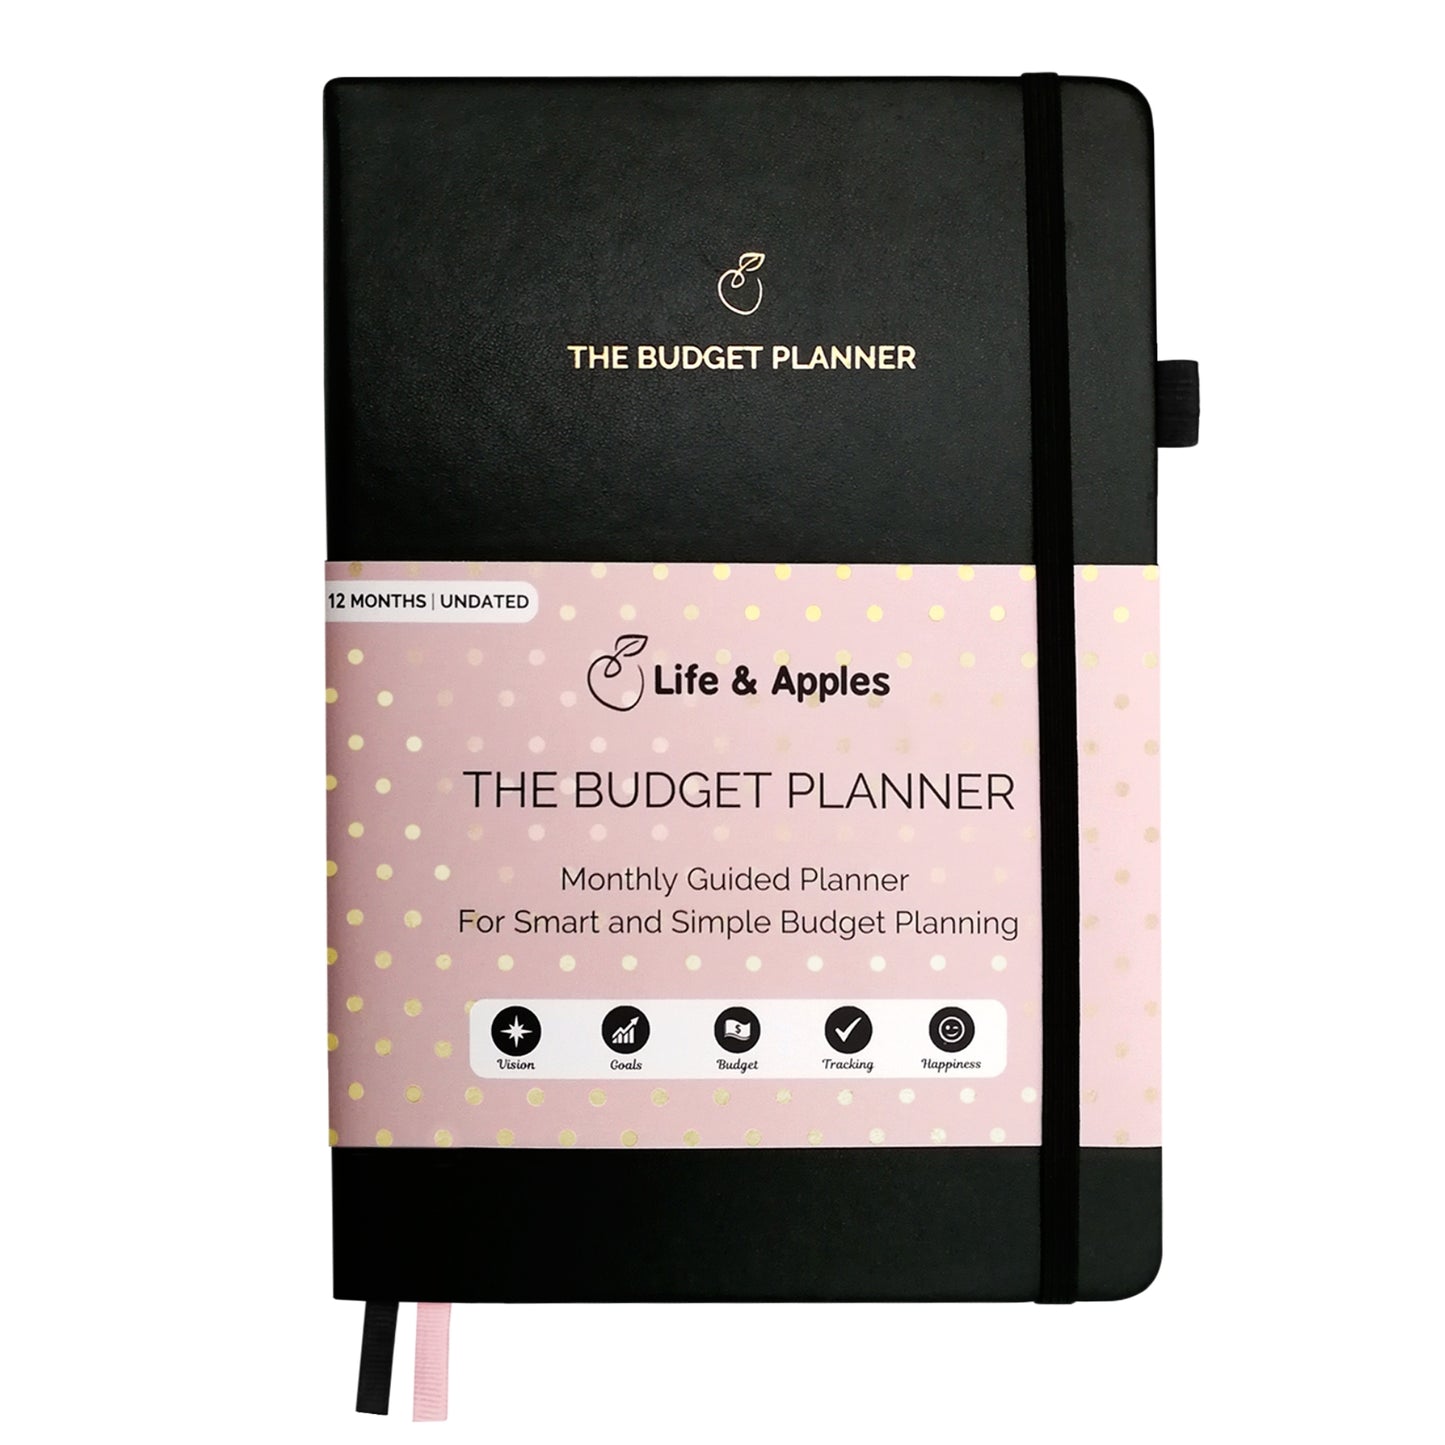 The Budget Planner